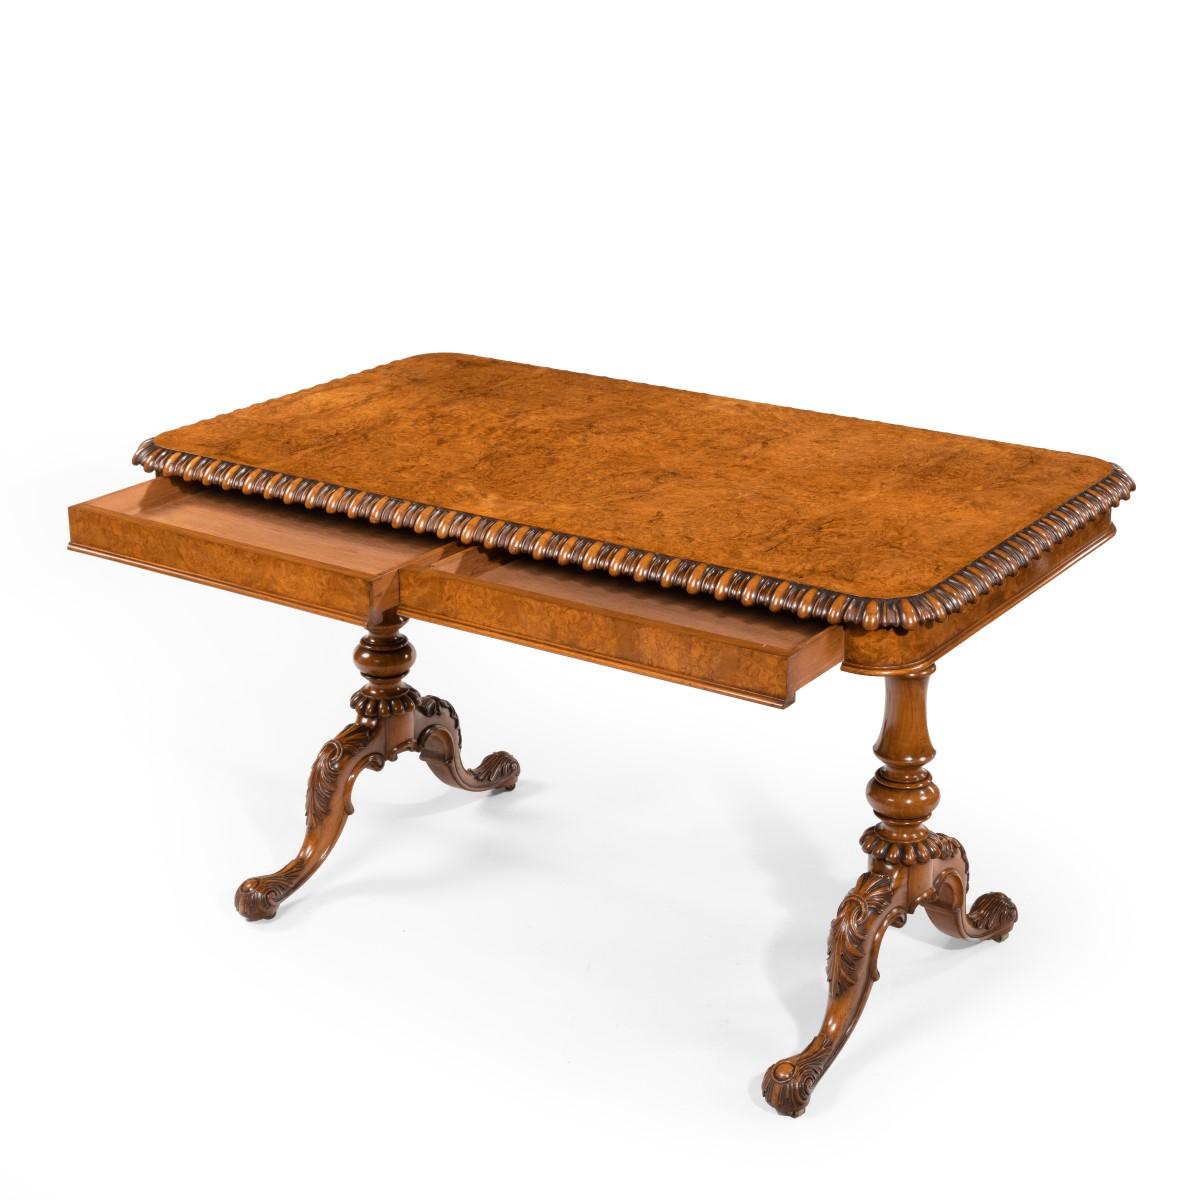 Early Victorian Solid Walnut Library Table Made for Gillows by John Barrow In Good Condition For Sale In Lymington, Hampshire